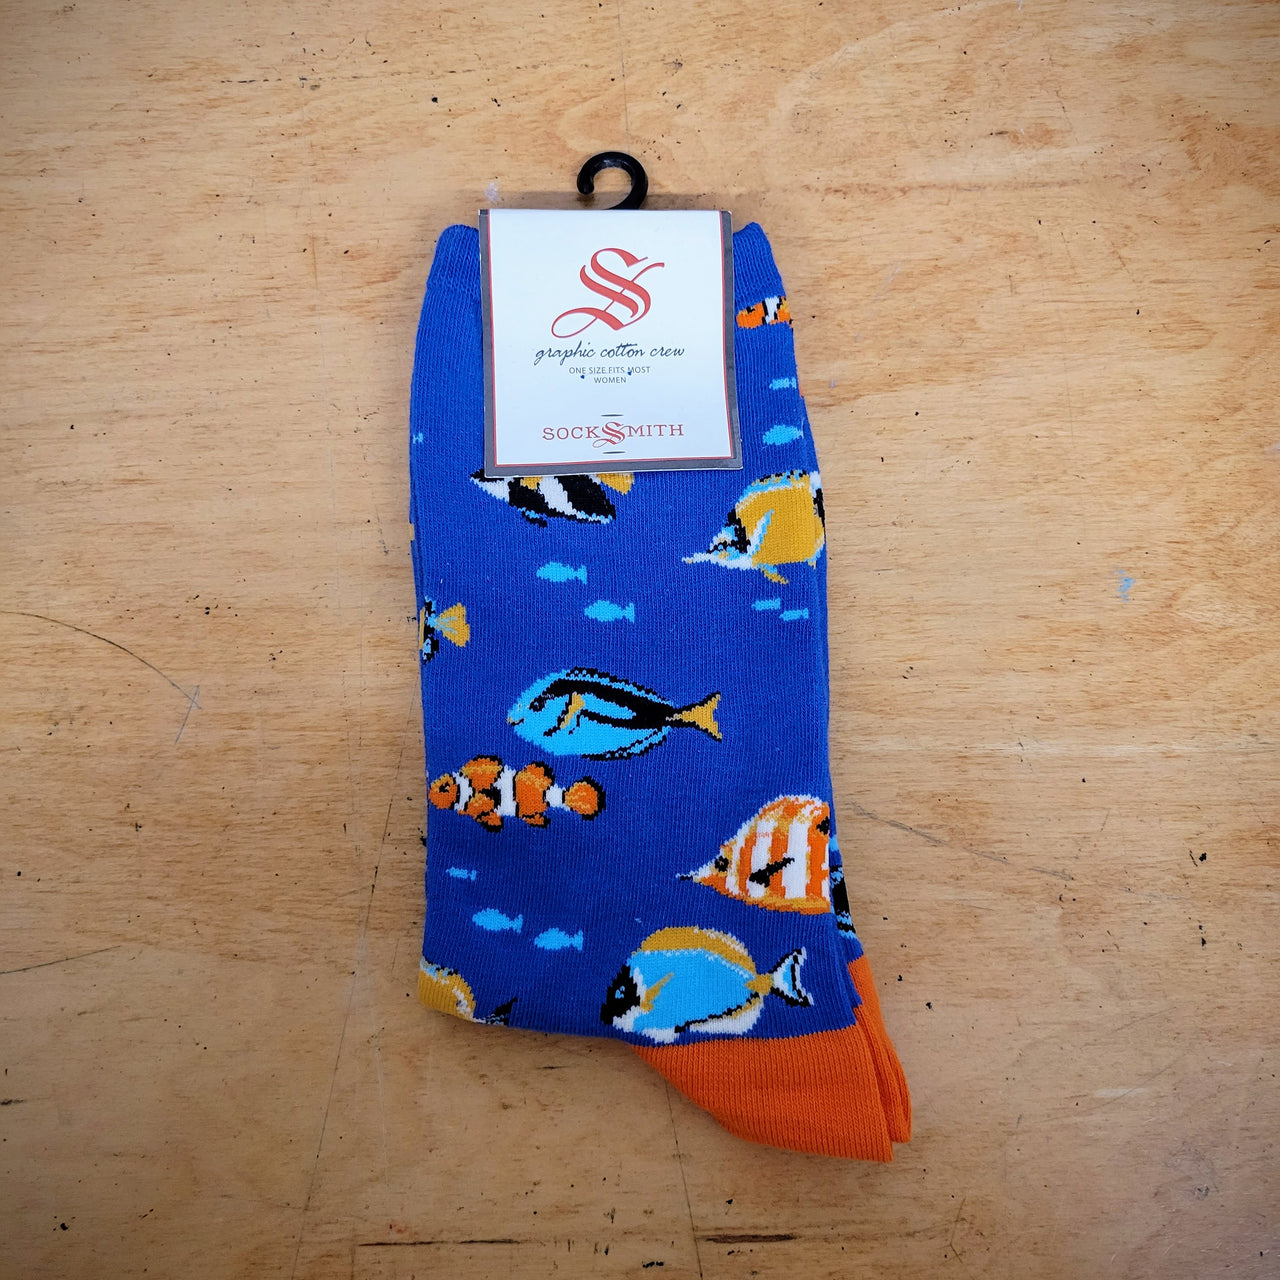 A pair of blue socks with fish on them.